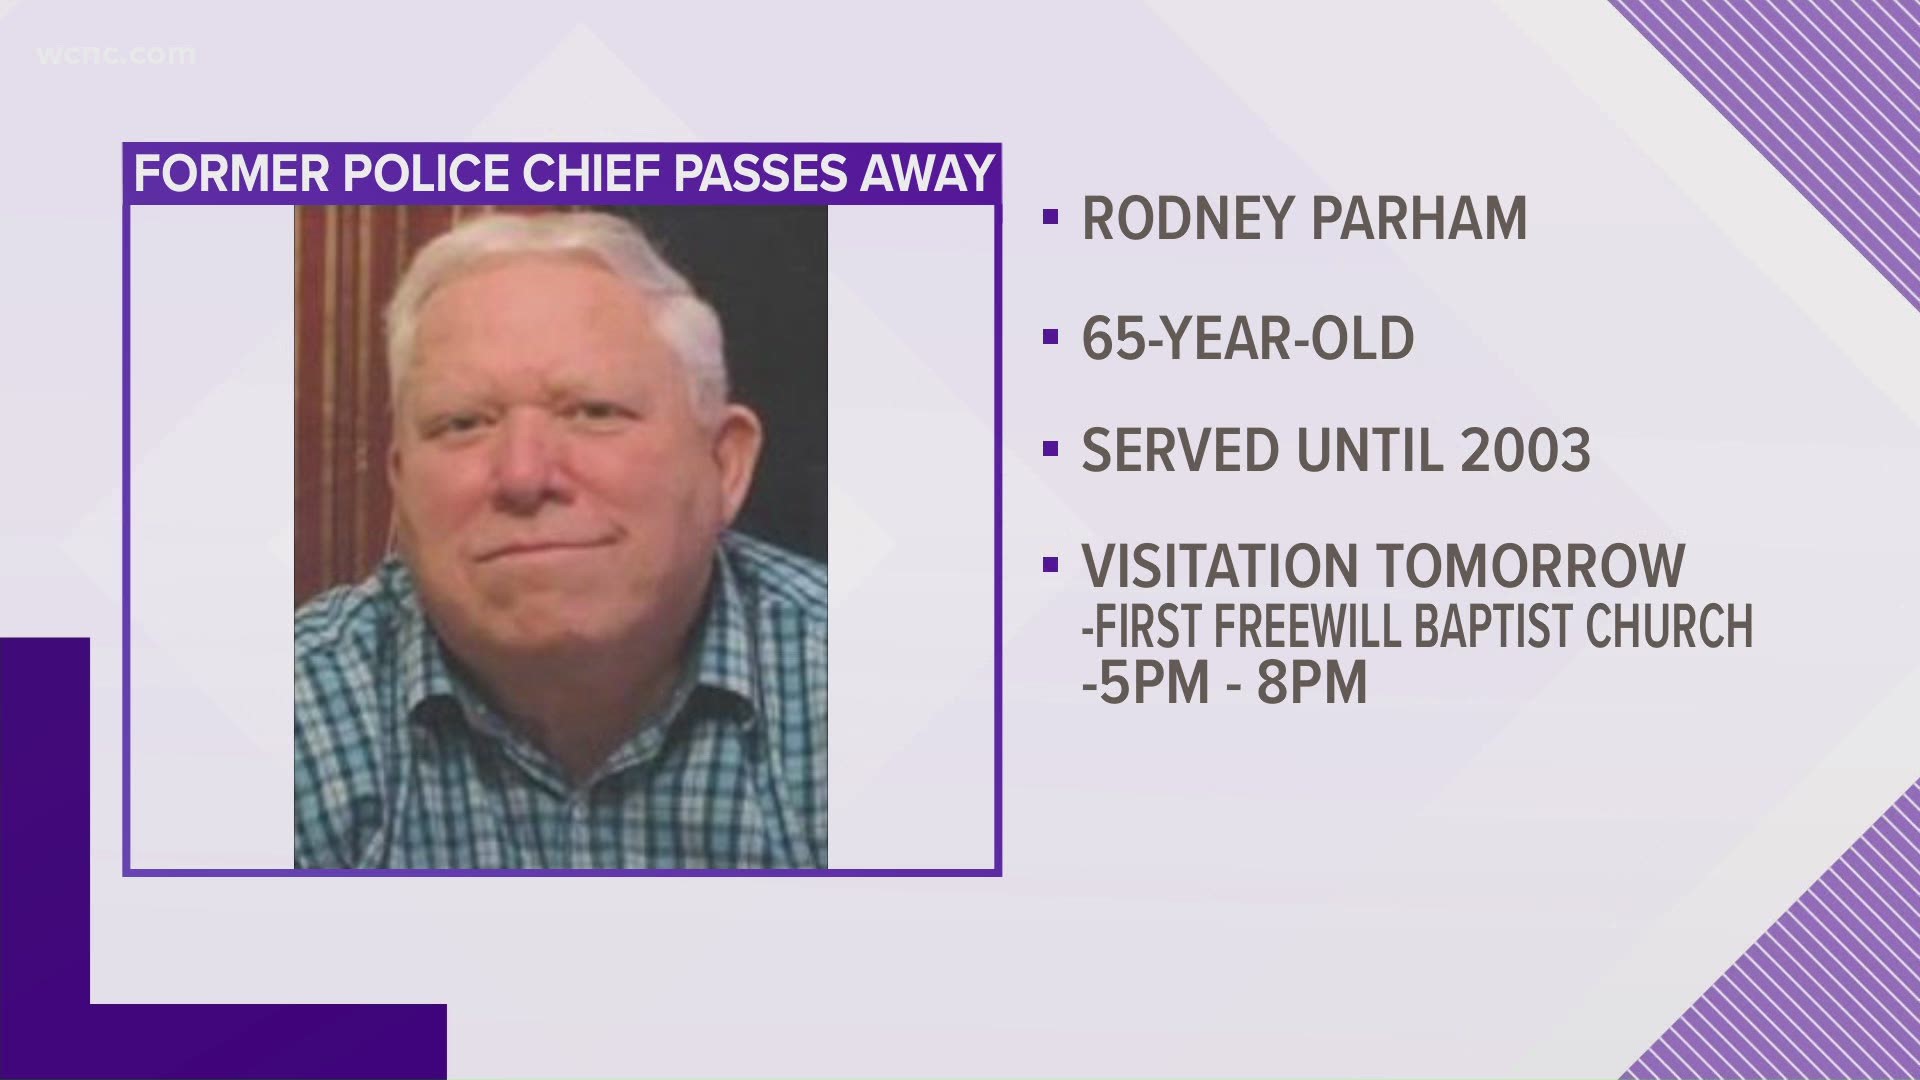 Gastonia's former police chief, Rodney Parham, passed away on Friday from COVID-19.